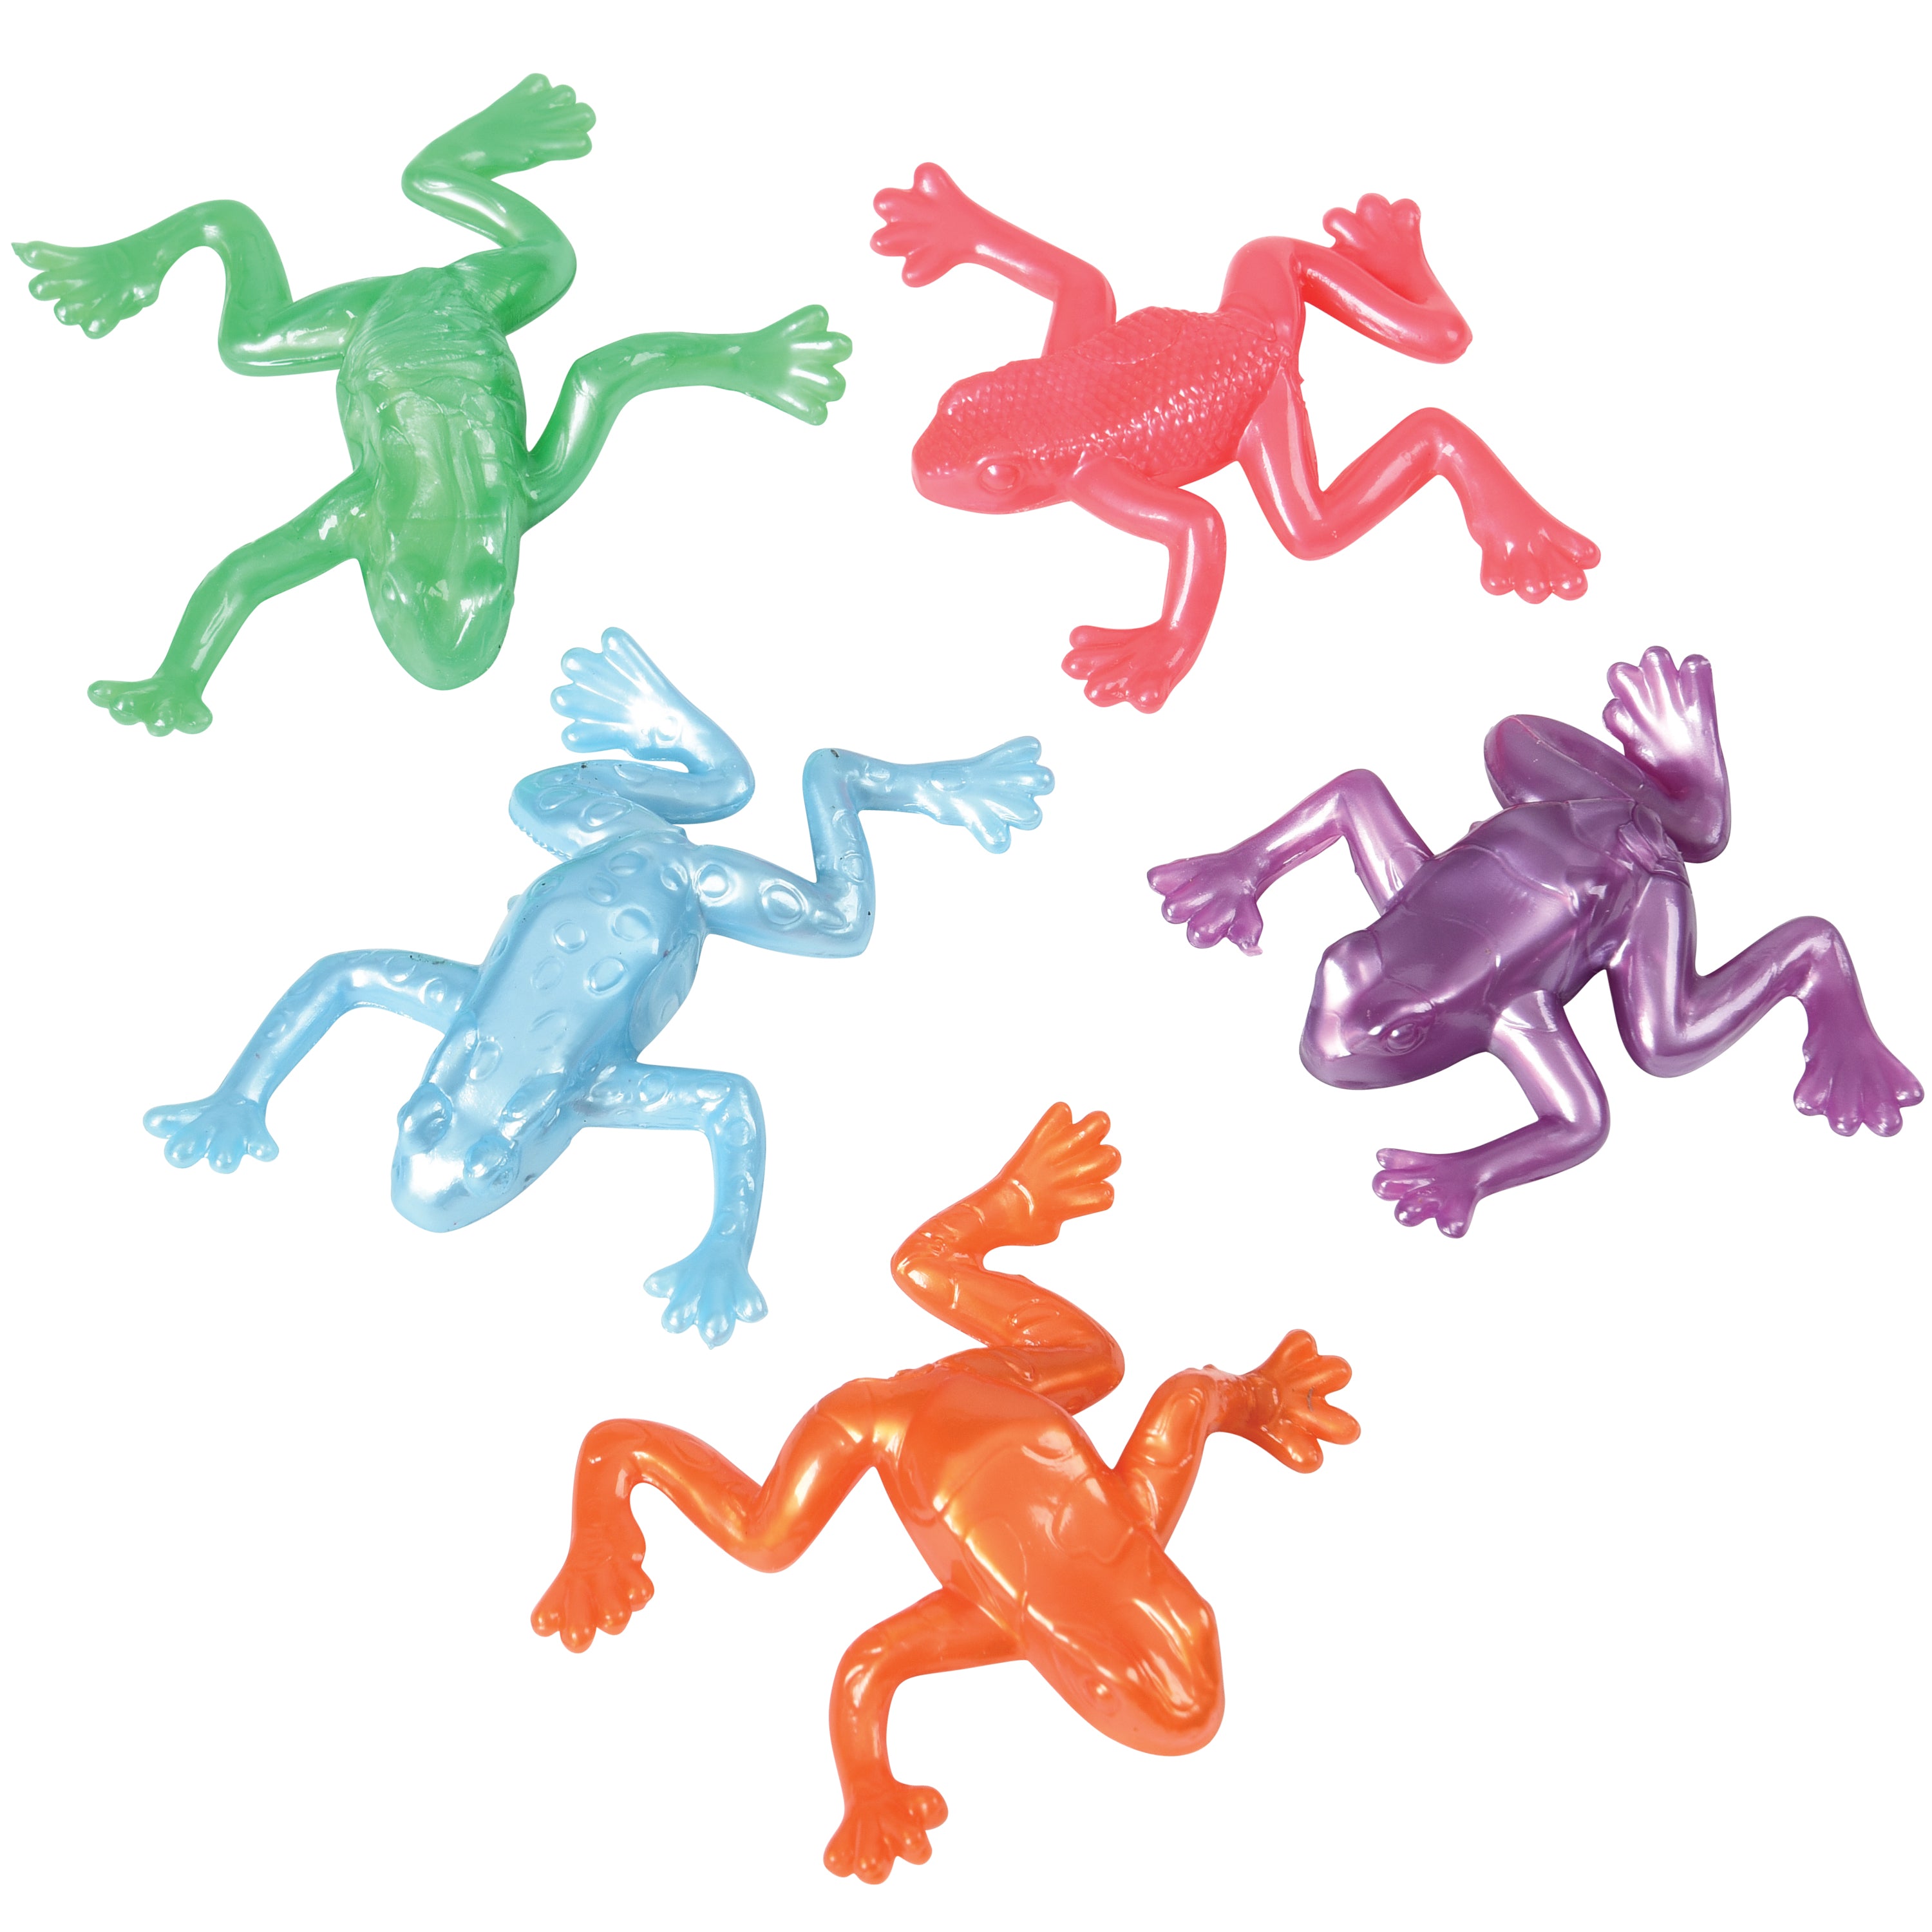 Stretchy Frogs Toy Set (One Dozen) - Only $5.58 at Carnival Source